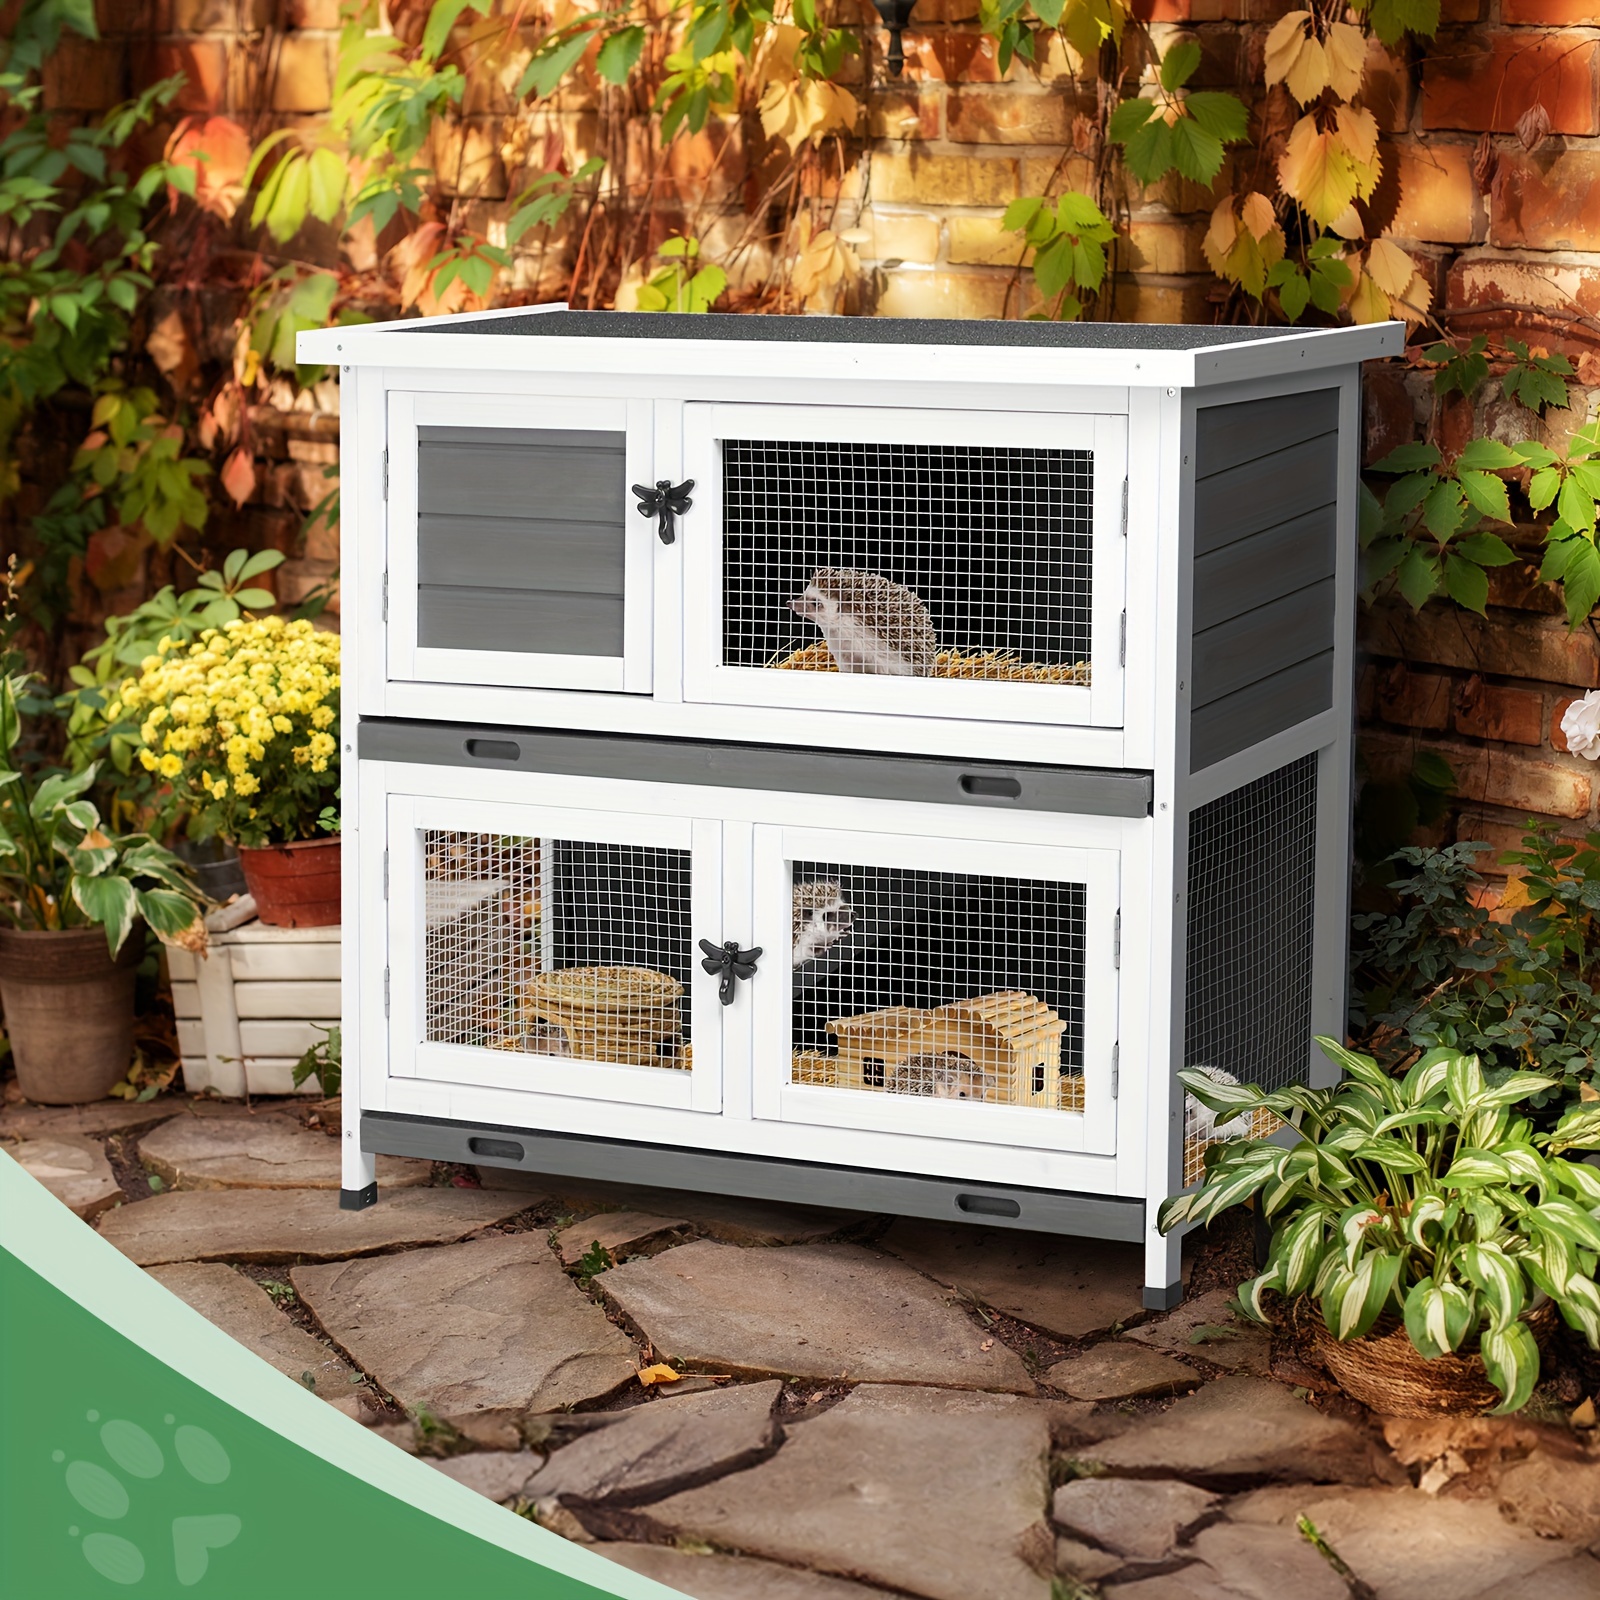 2 story solid wood rabbit hutch bunny cage with 2 large main rooms indoor outdoor rabbit house guinea pig cage pet house for small animals with 2 removable trays grey